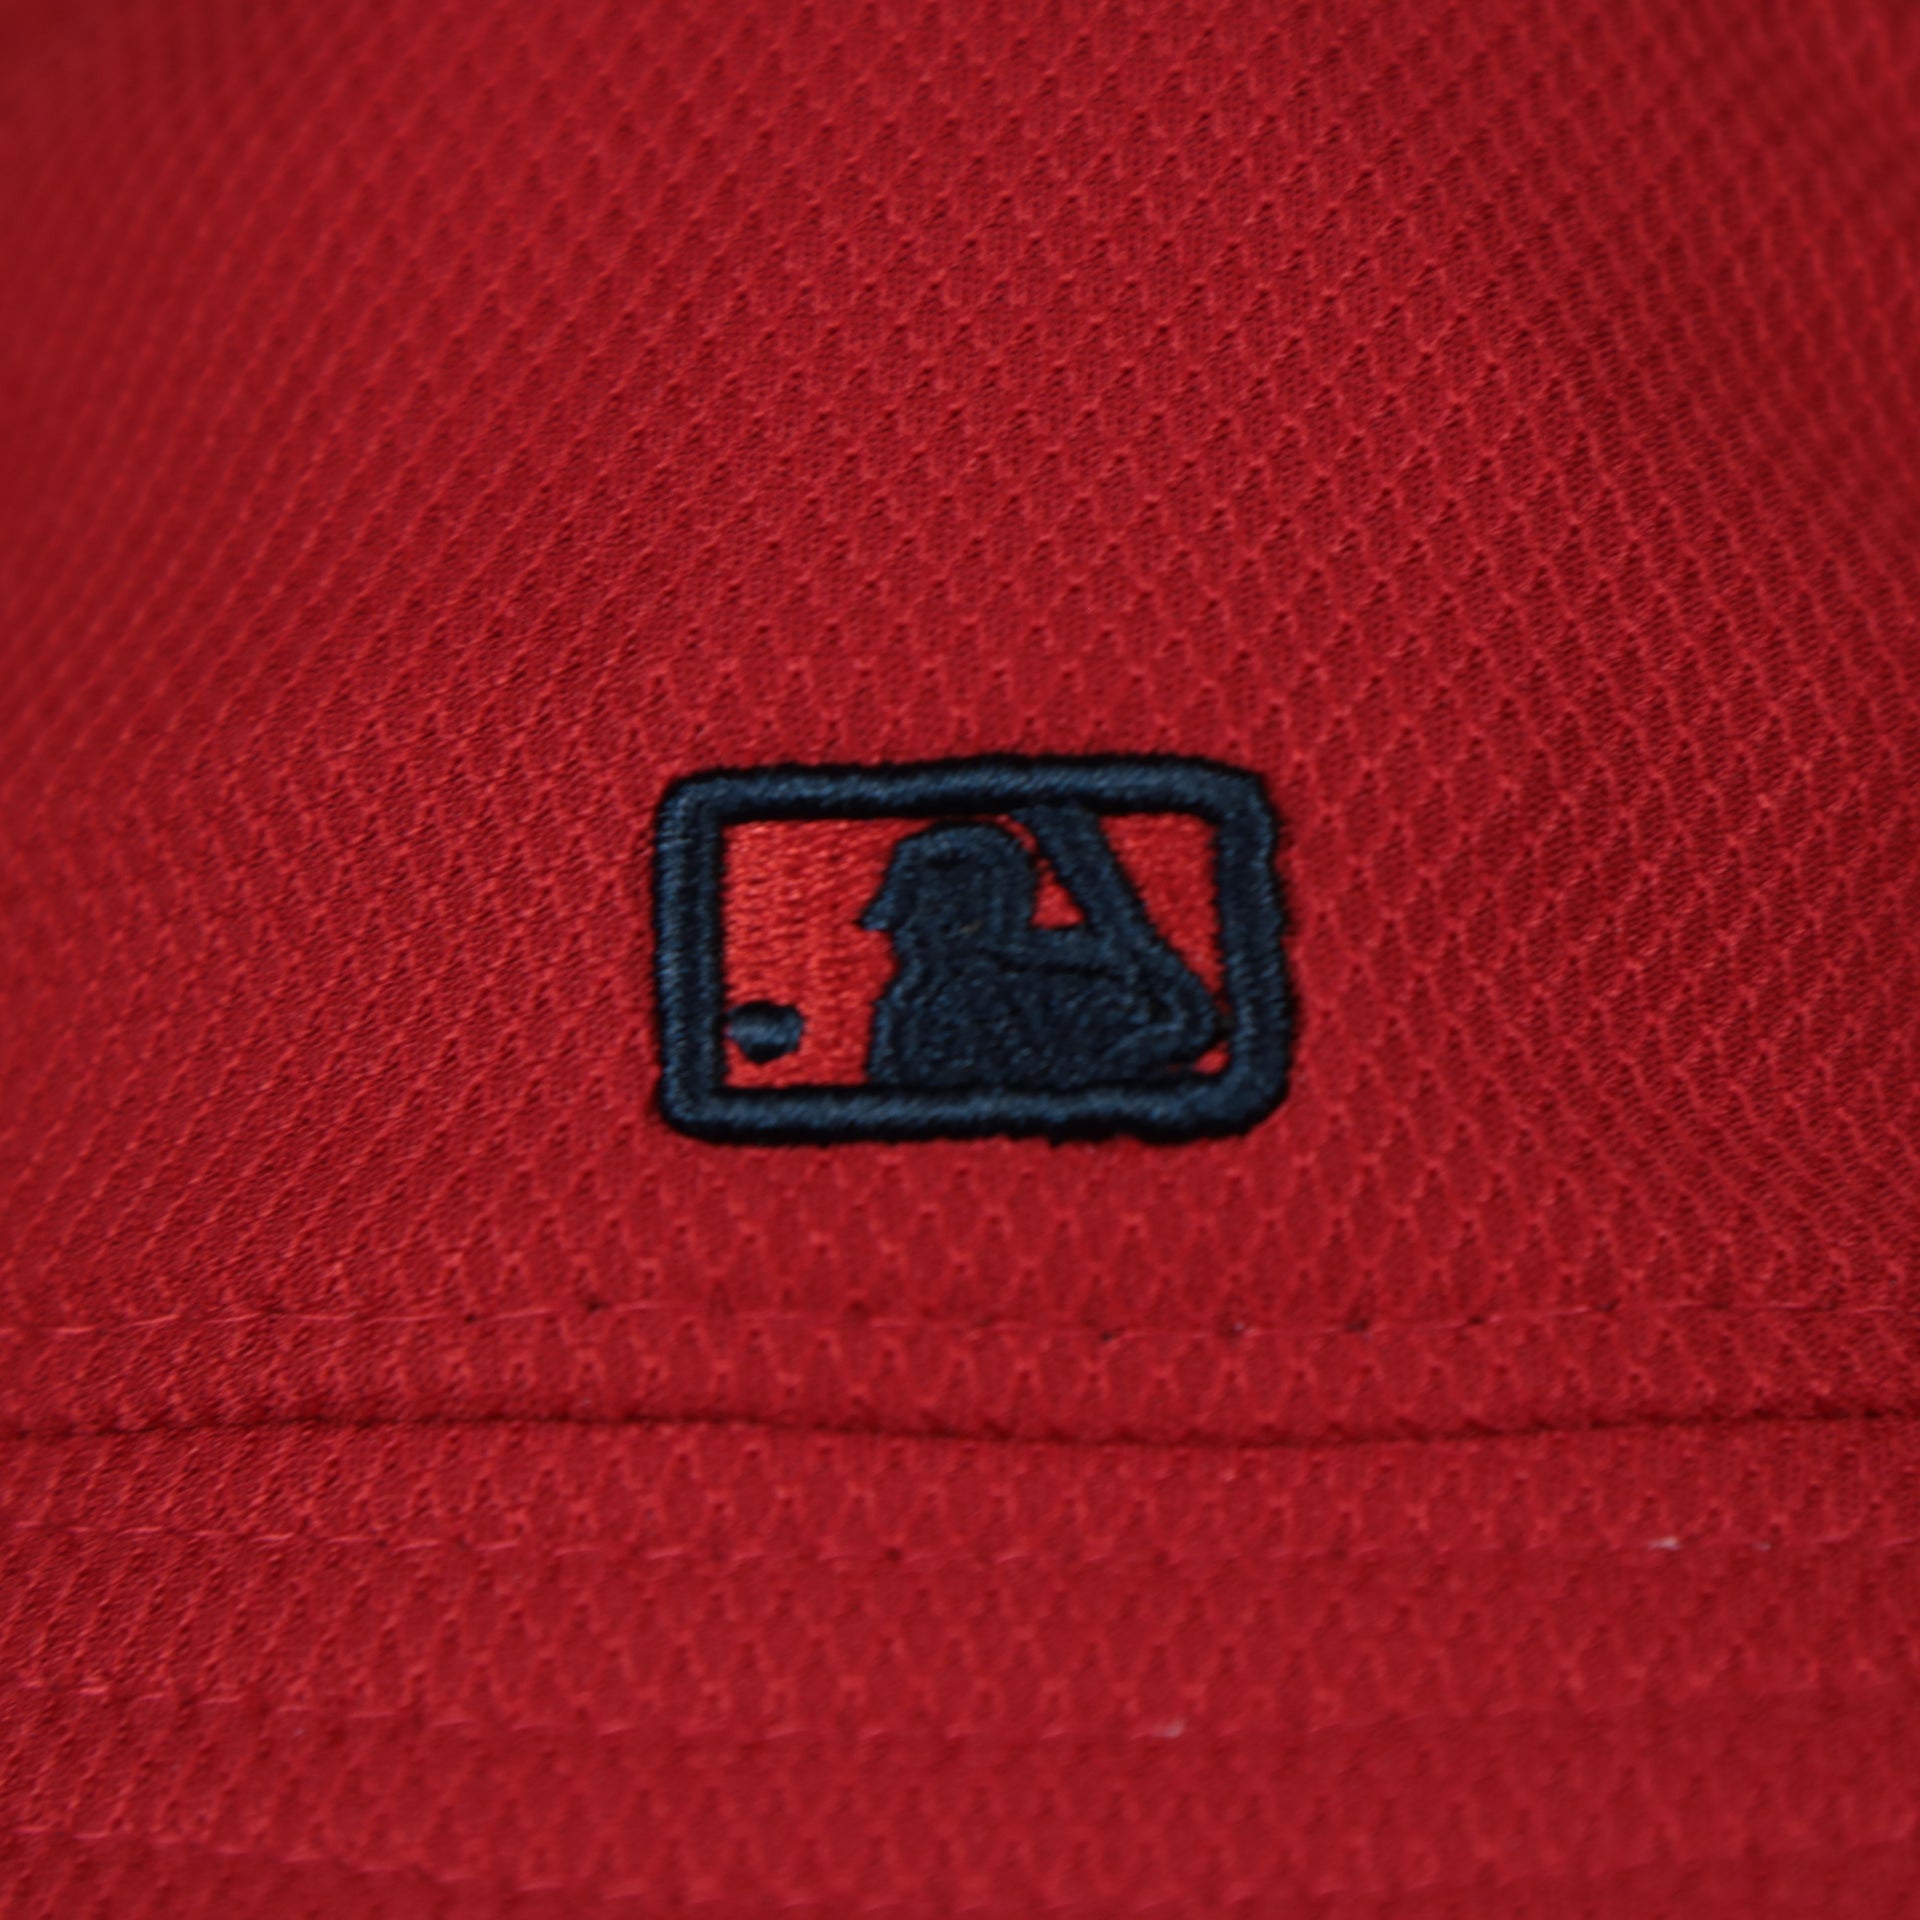 A close up of the MLB Batterman logo on the Anaheim Angels MLB 2022 Spring Training Onfield Bucket Hat